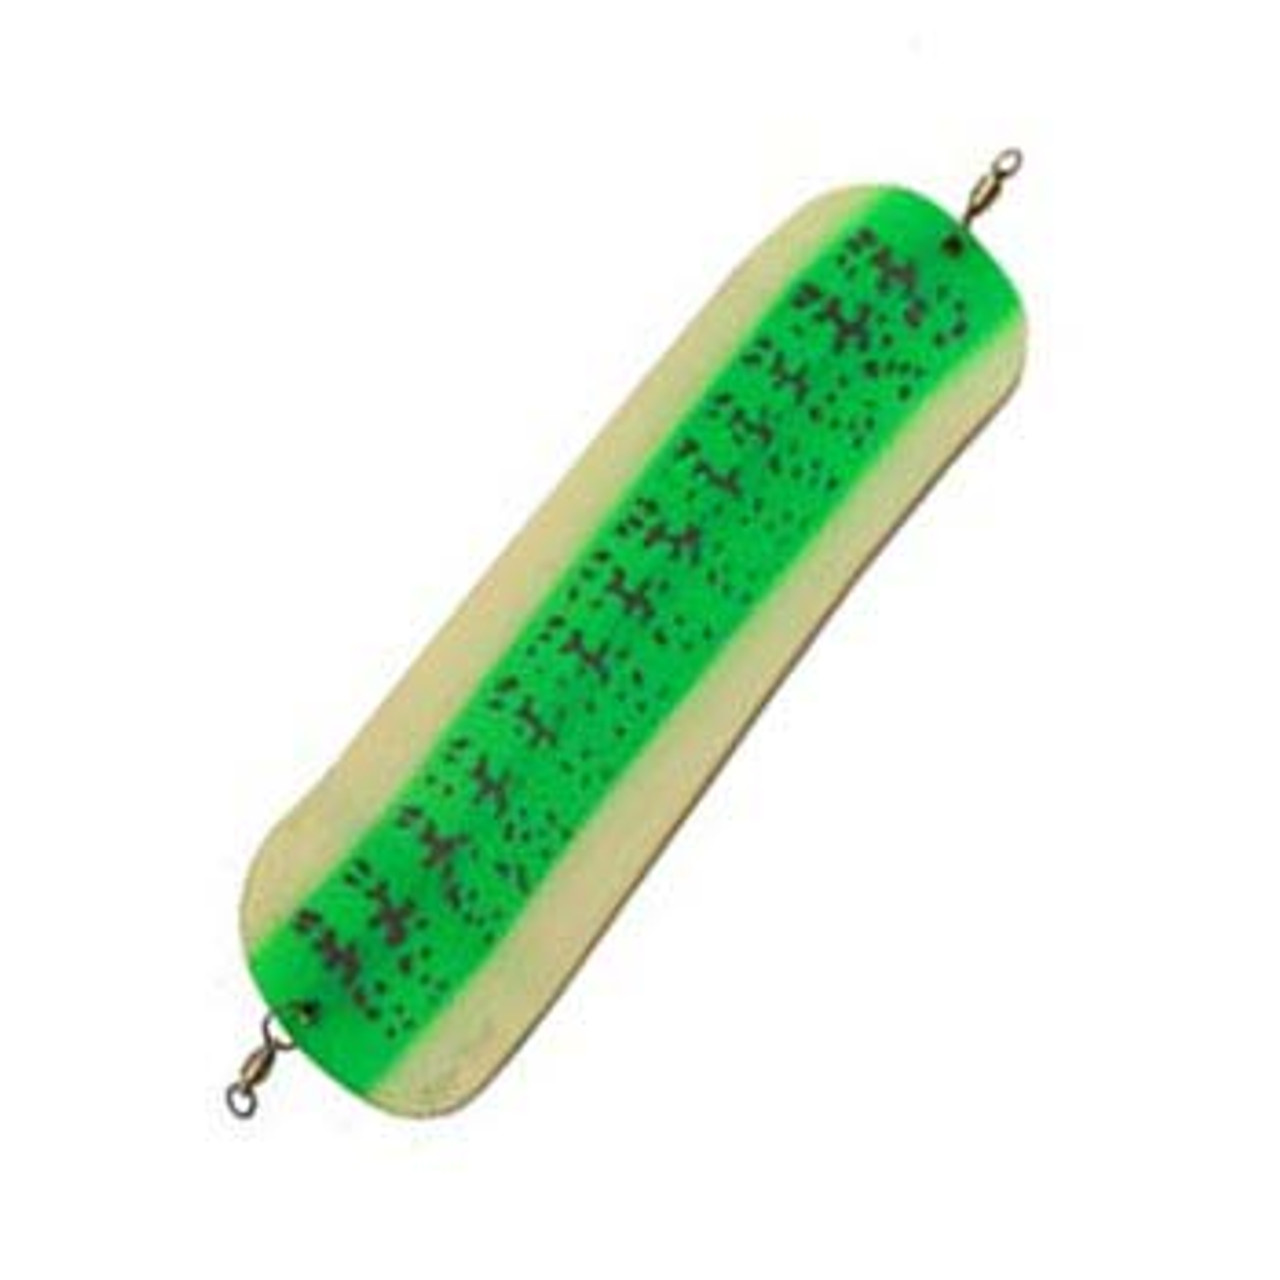 Pro-Troll SpinRay Flashers, UV Blade Bubble Up Chart Tape 